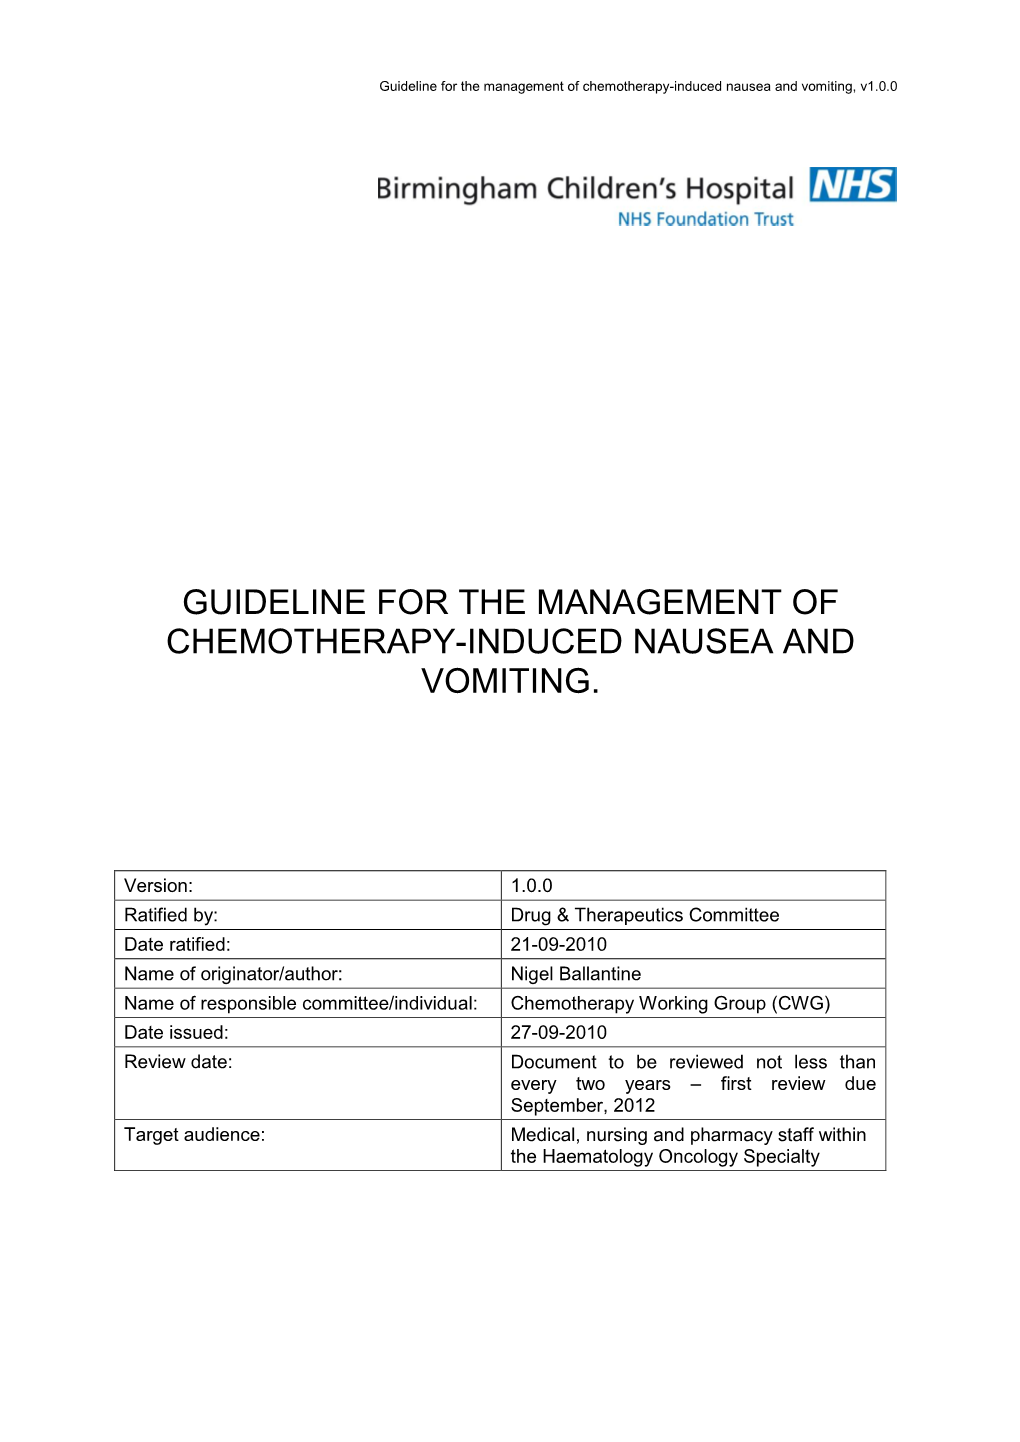 Guideline for the Management of Chemotherapy-Induced Nausea and Vomiting, V1.0.0